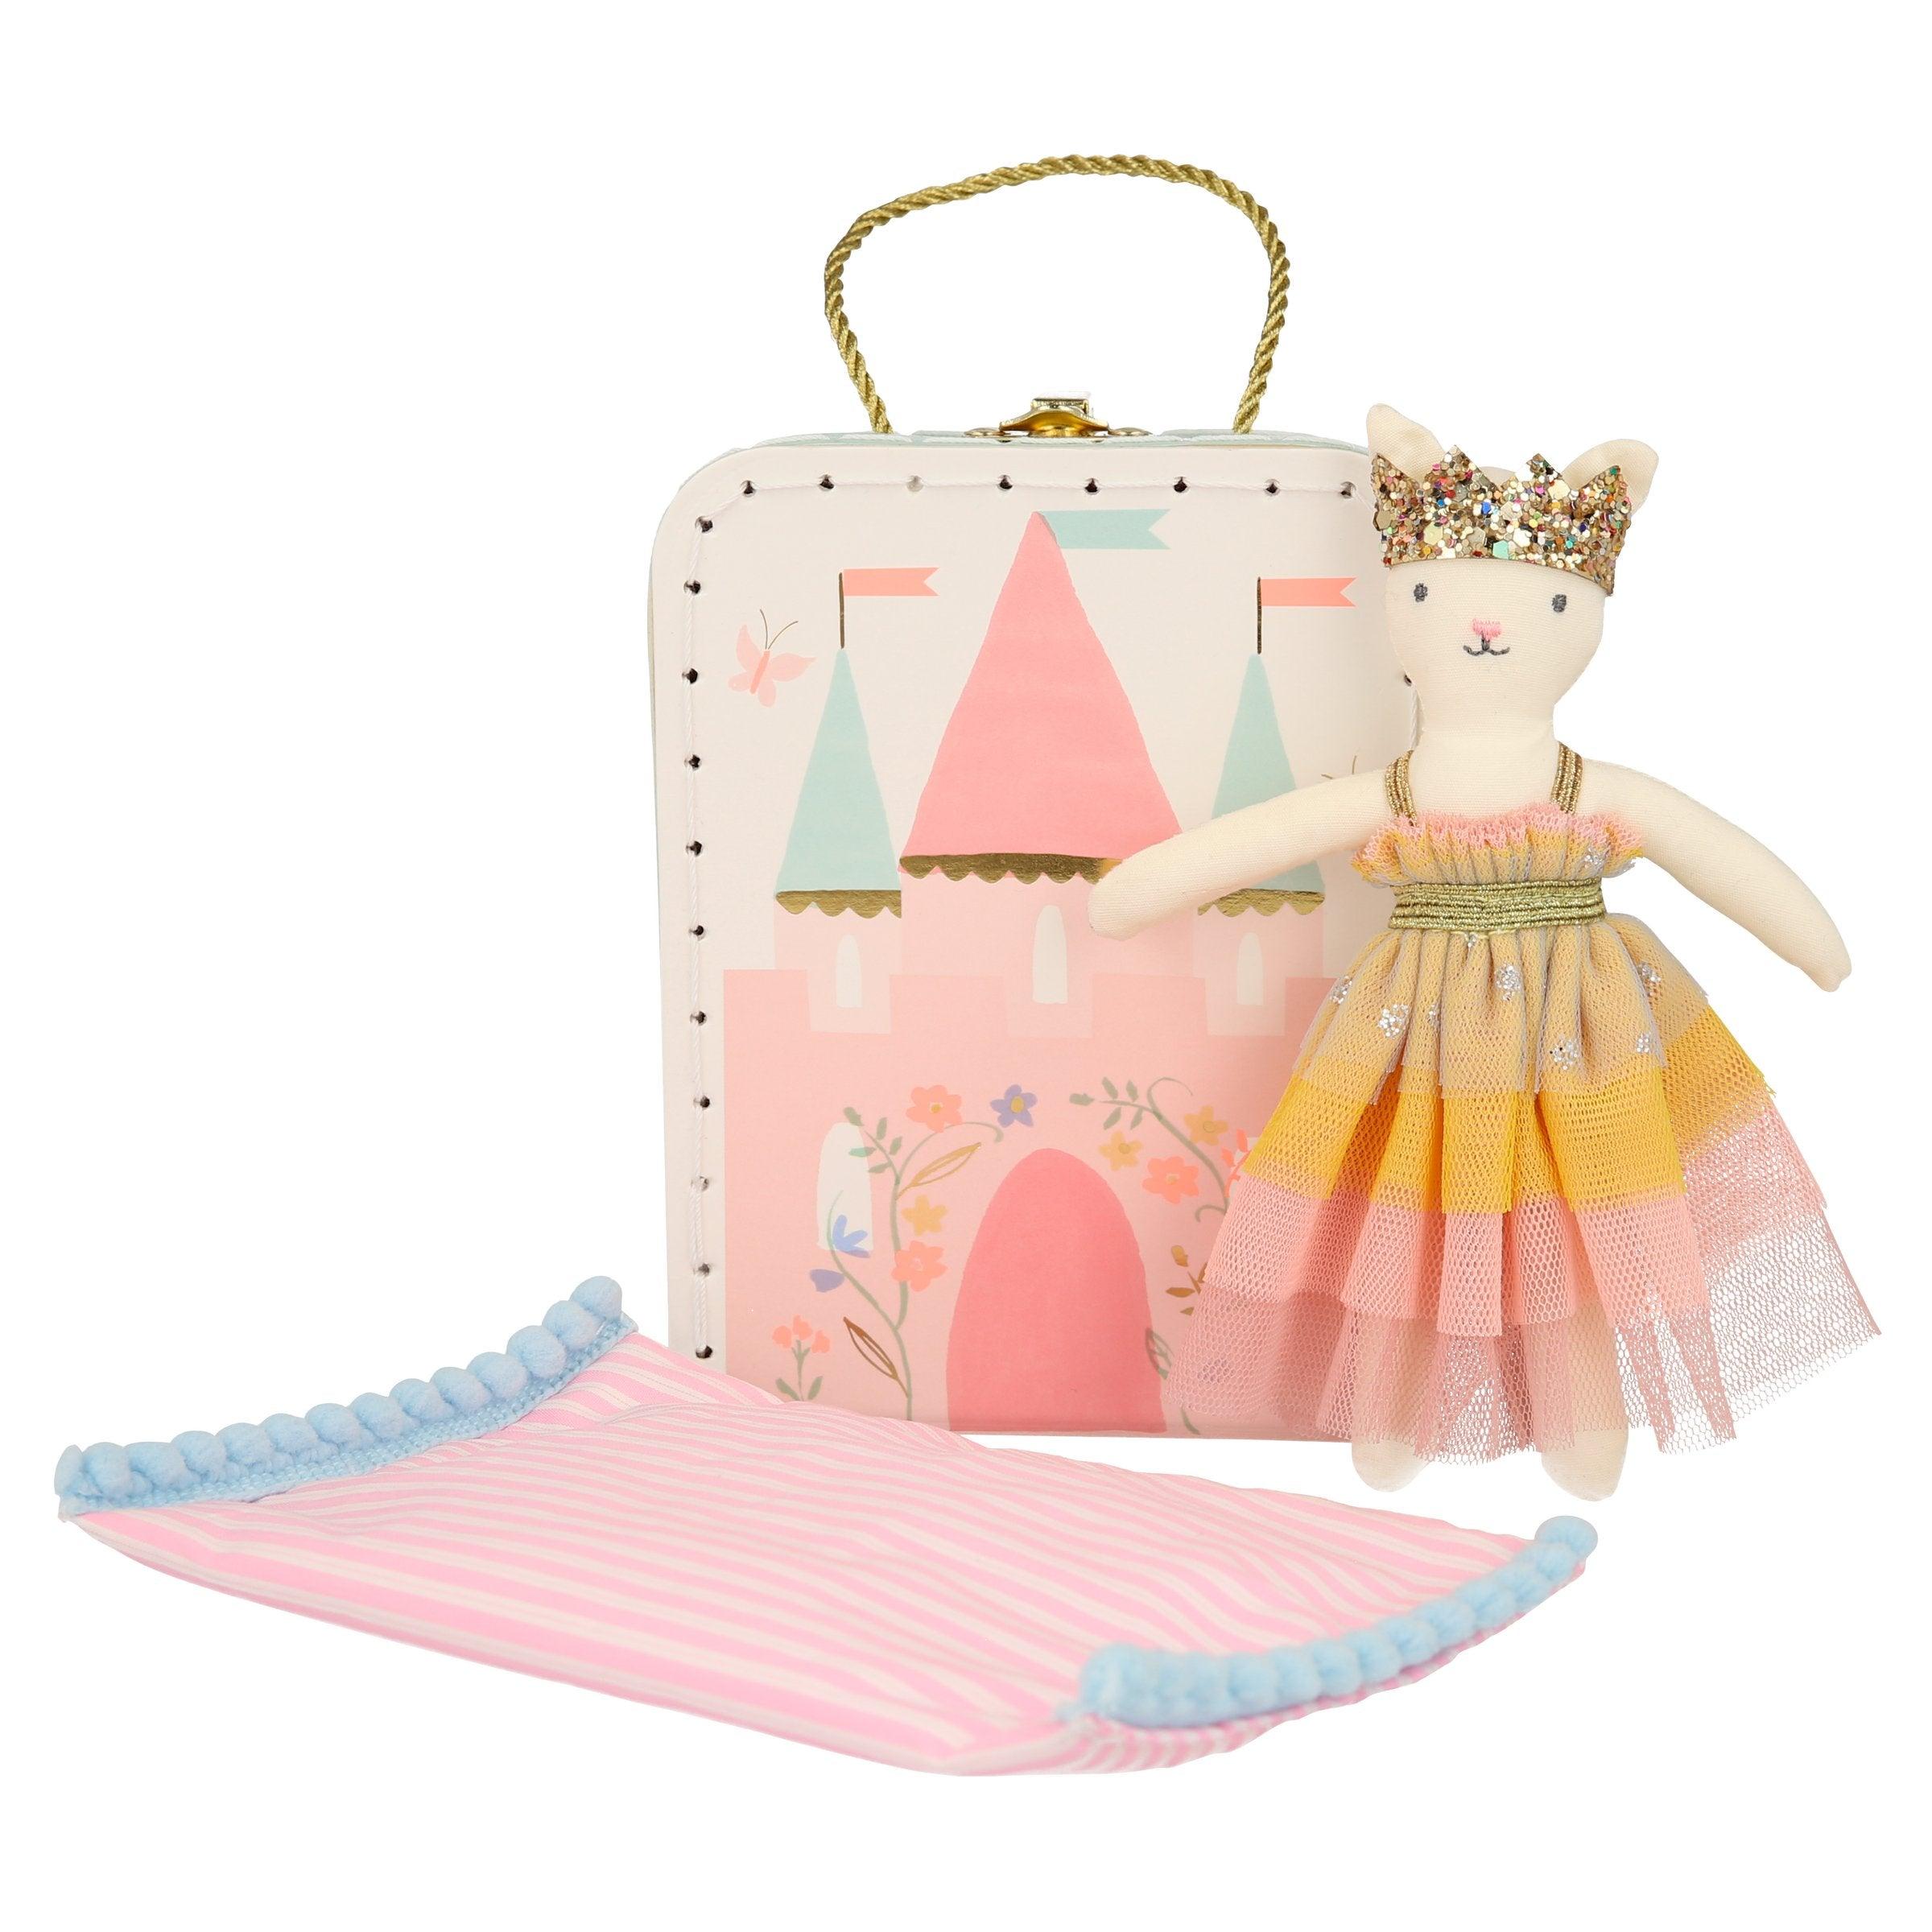 Castle & Princess Cat Mini Suitcase Doll - Why and Whale